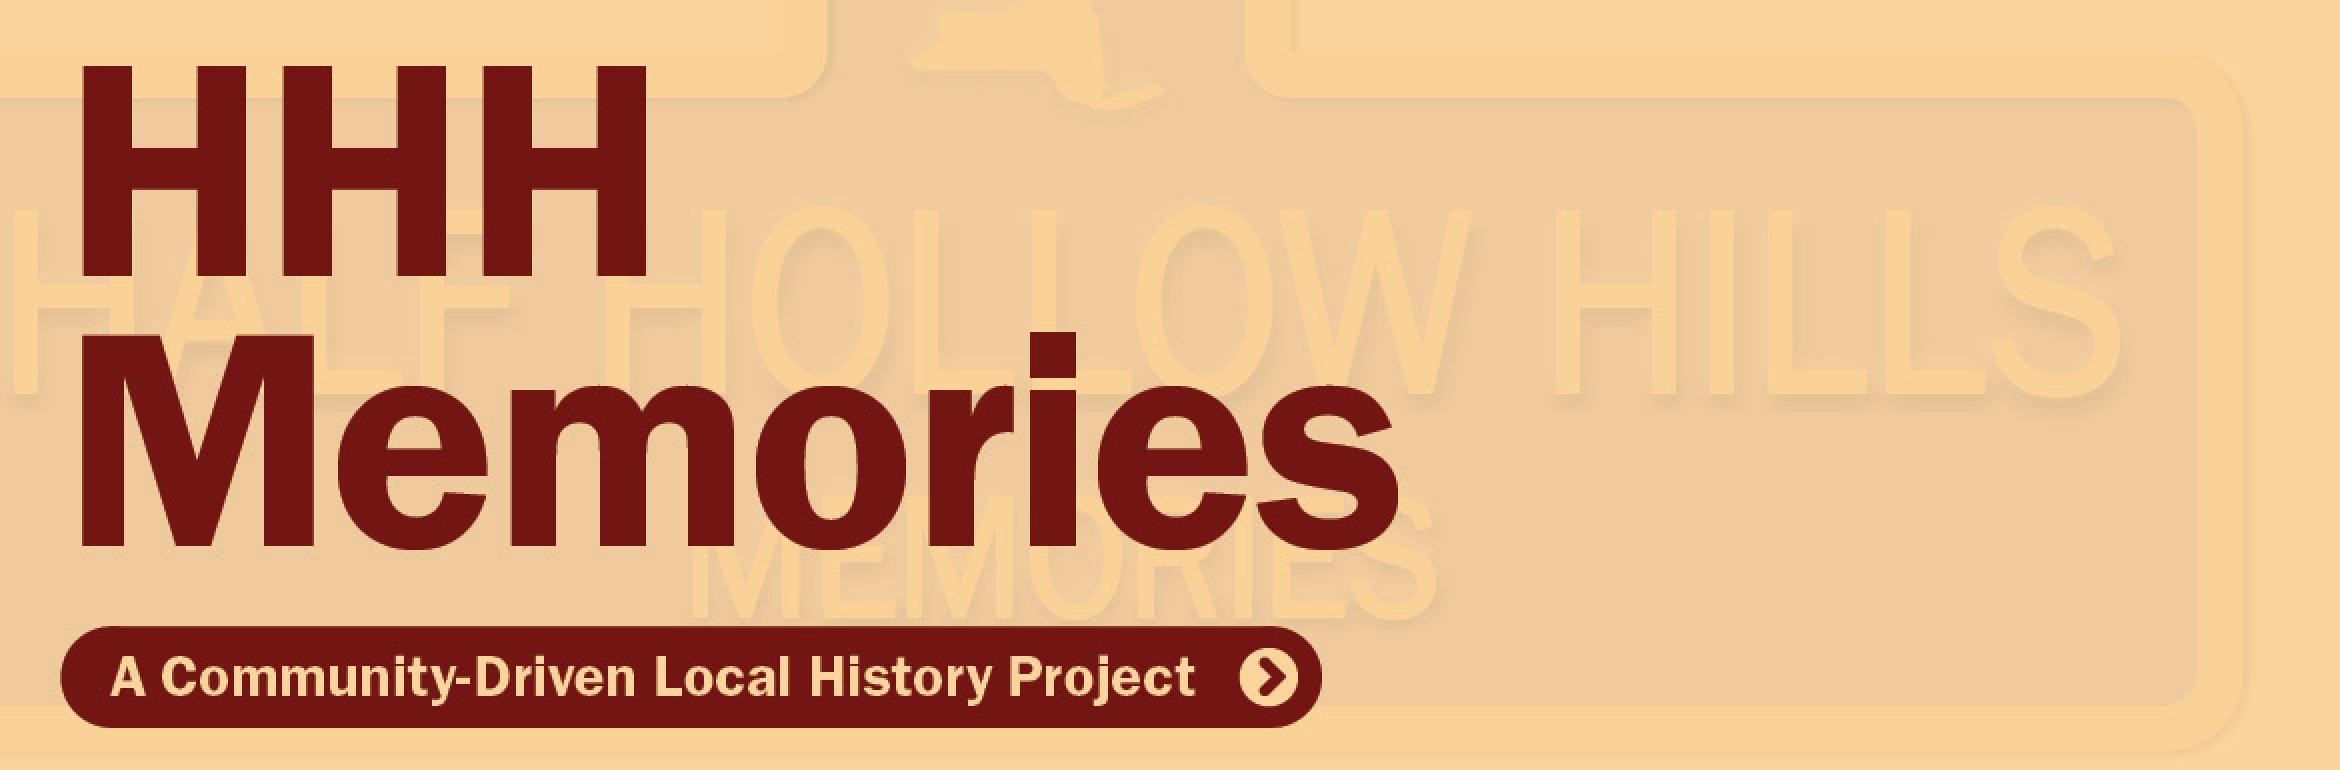 HHH Memories. A Community-Driven Local History Project.